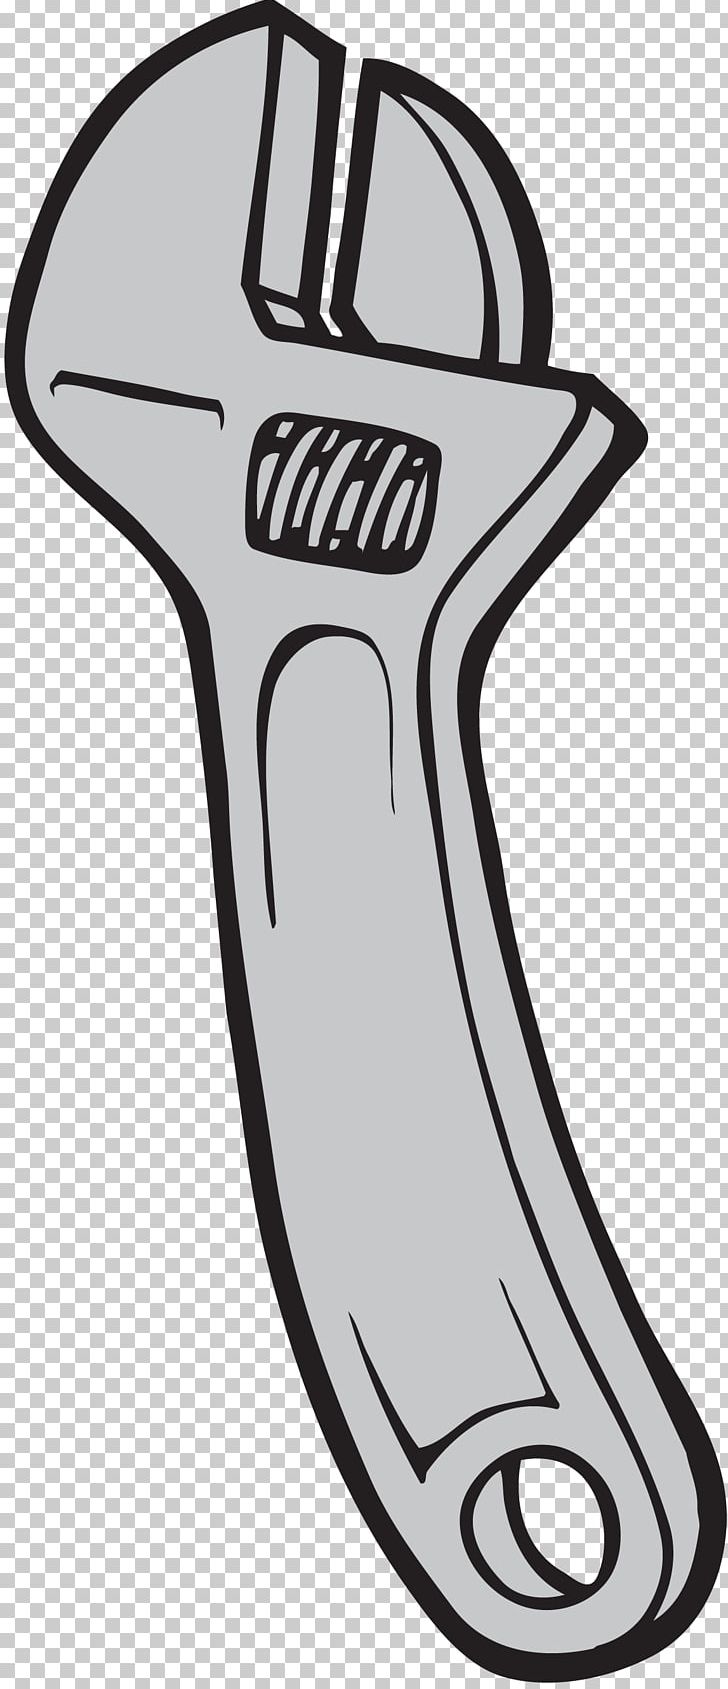 Spanners Portable Network Graphics Adjustable Spanner Drawing PNG, Clipart, Adjustable Spanner, Area, Black, Black And White, Cleaning Tools Free PNG Download